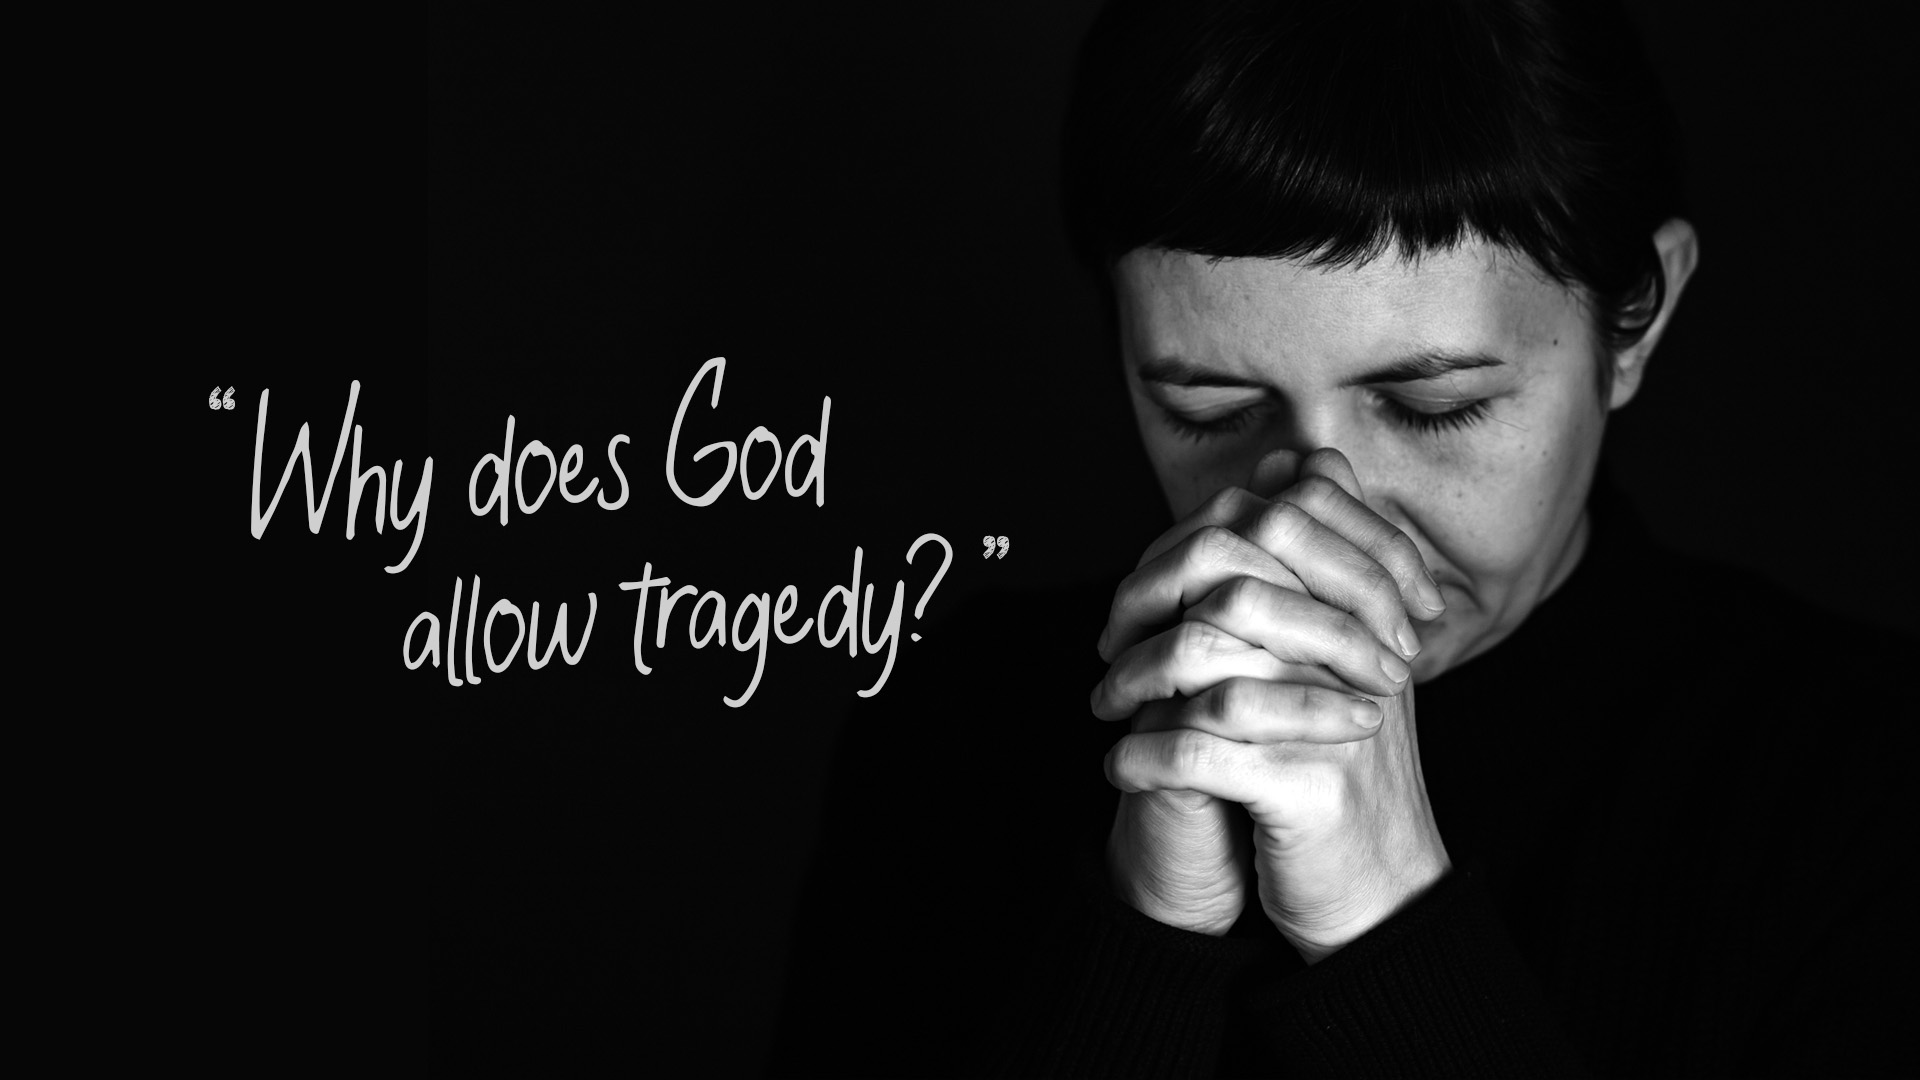 Why Does God Allow Tragedy? Wrestling With God and Prayer After Another Mass Shooting